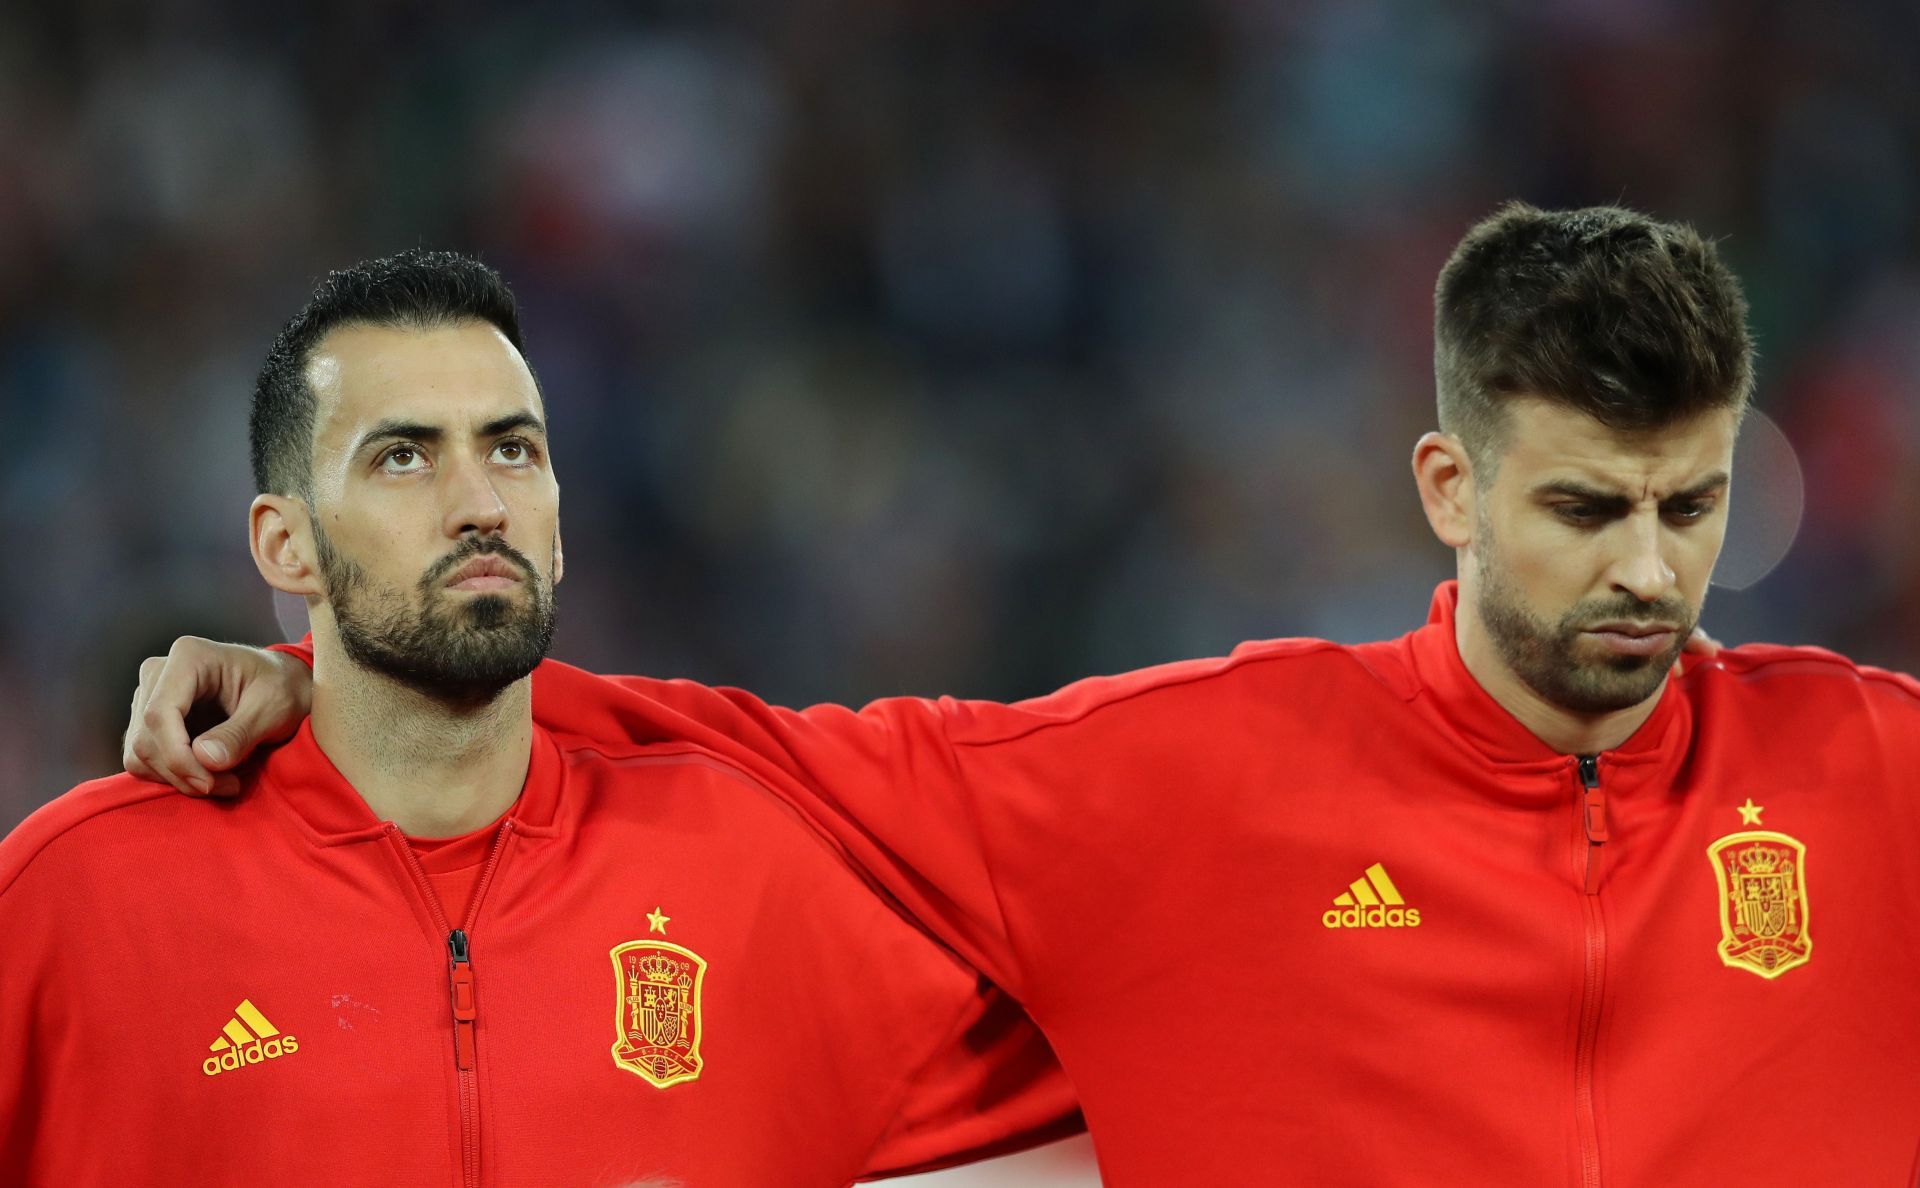 Sergio Busquets (L) and Gerard Pique (R) are nearing the end of their careers.